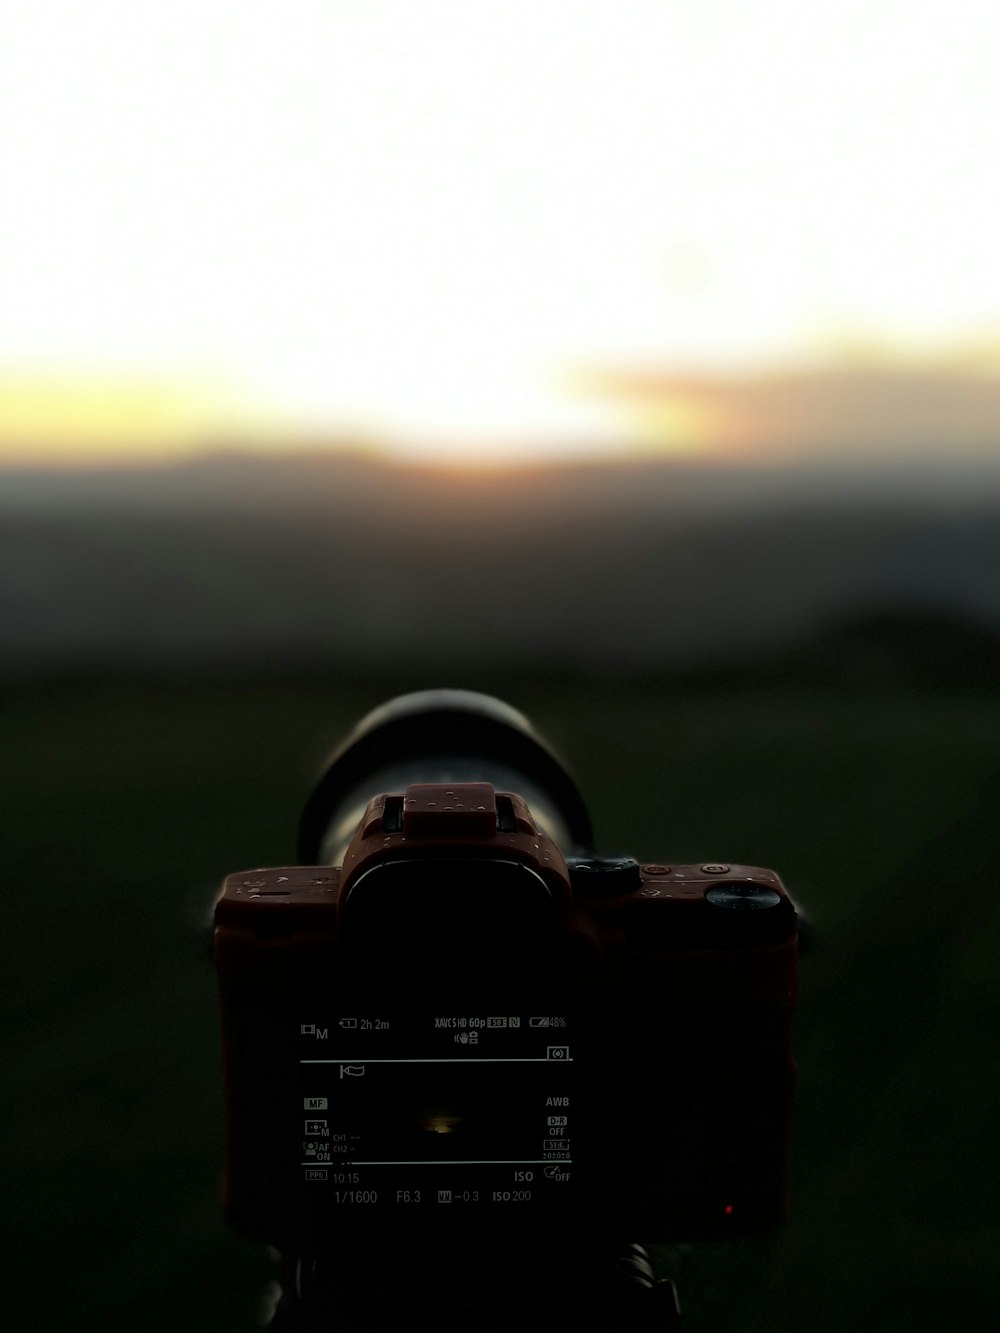 black camera on green grass during sunset